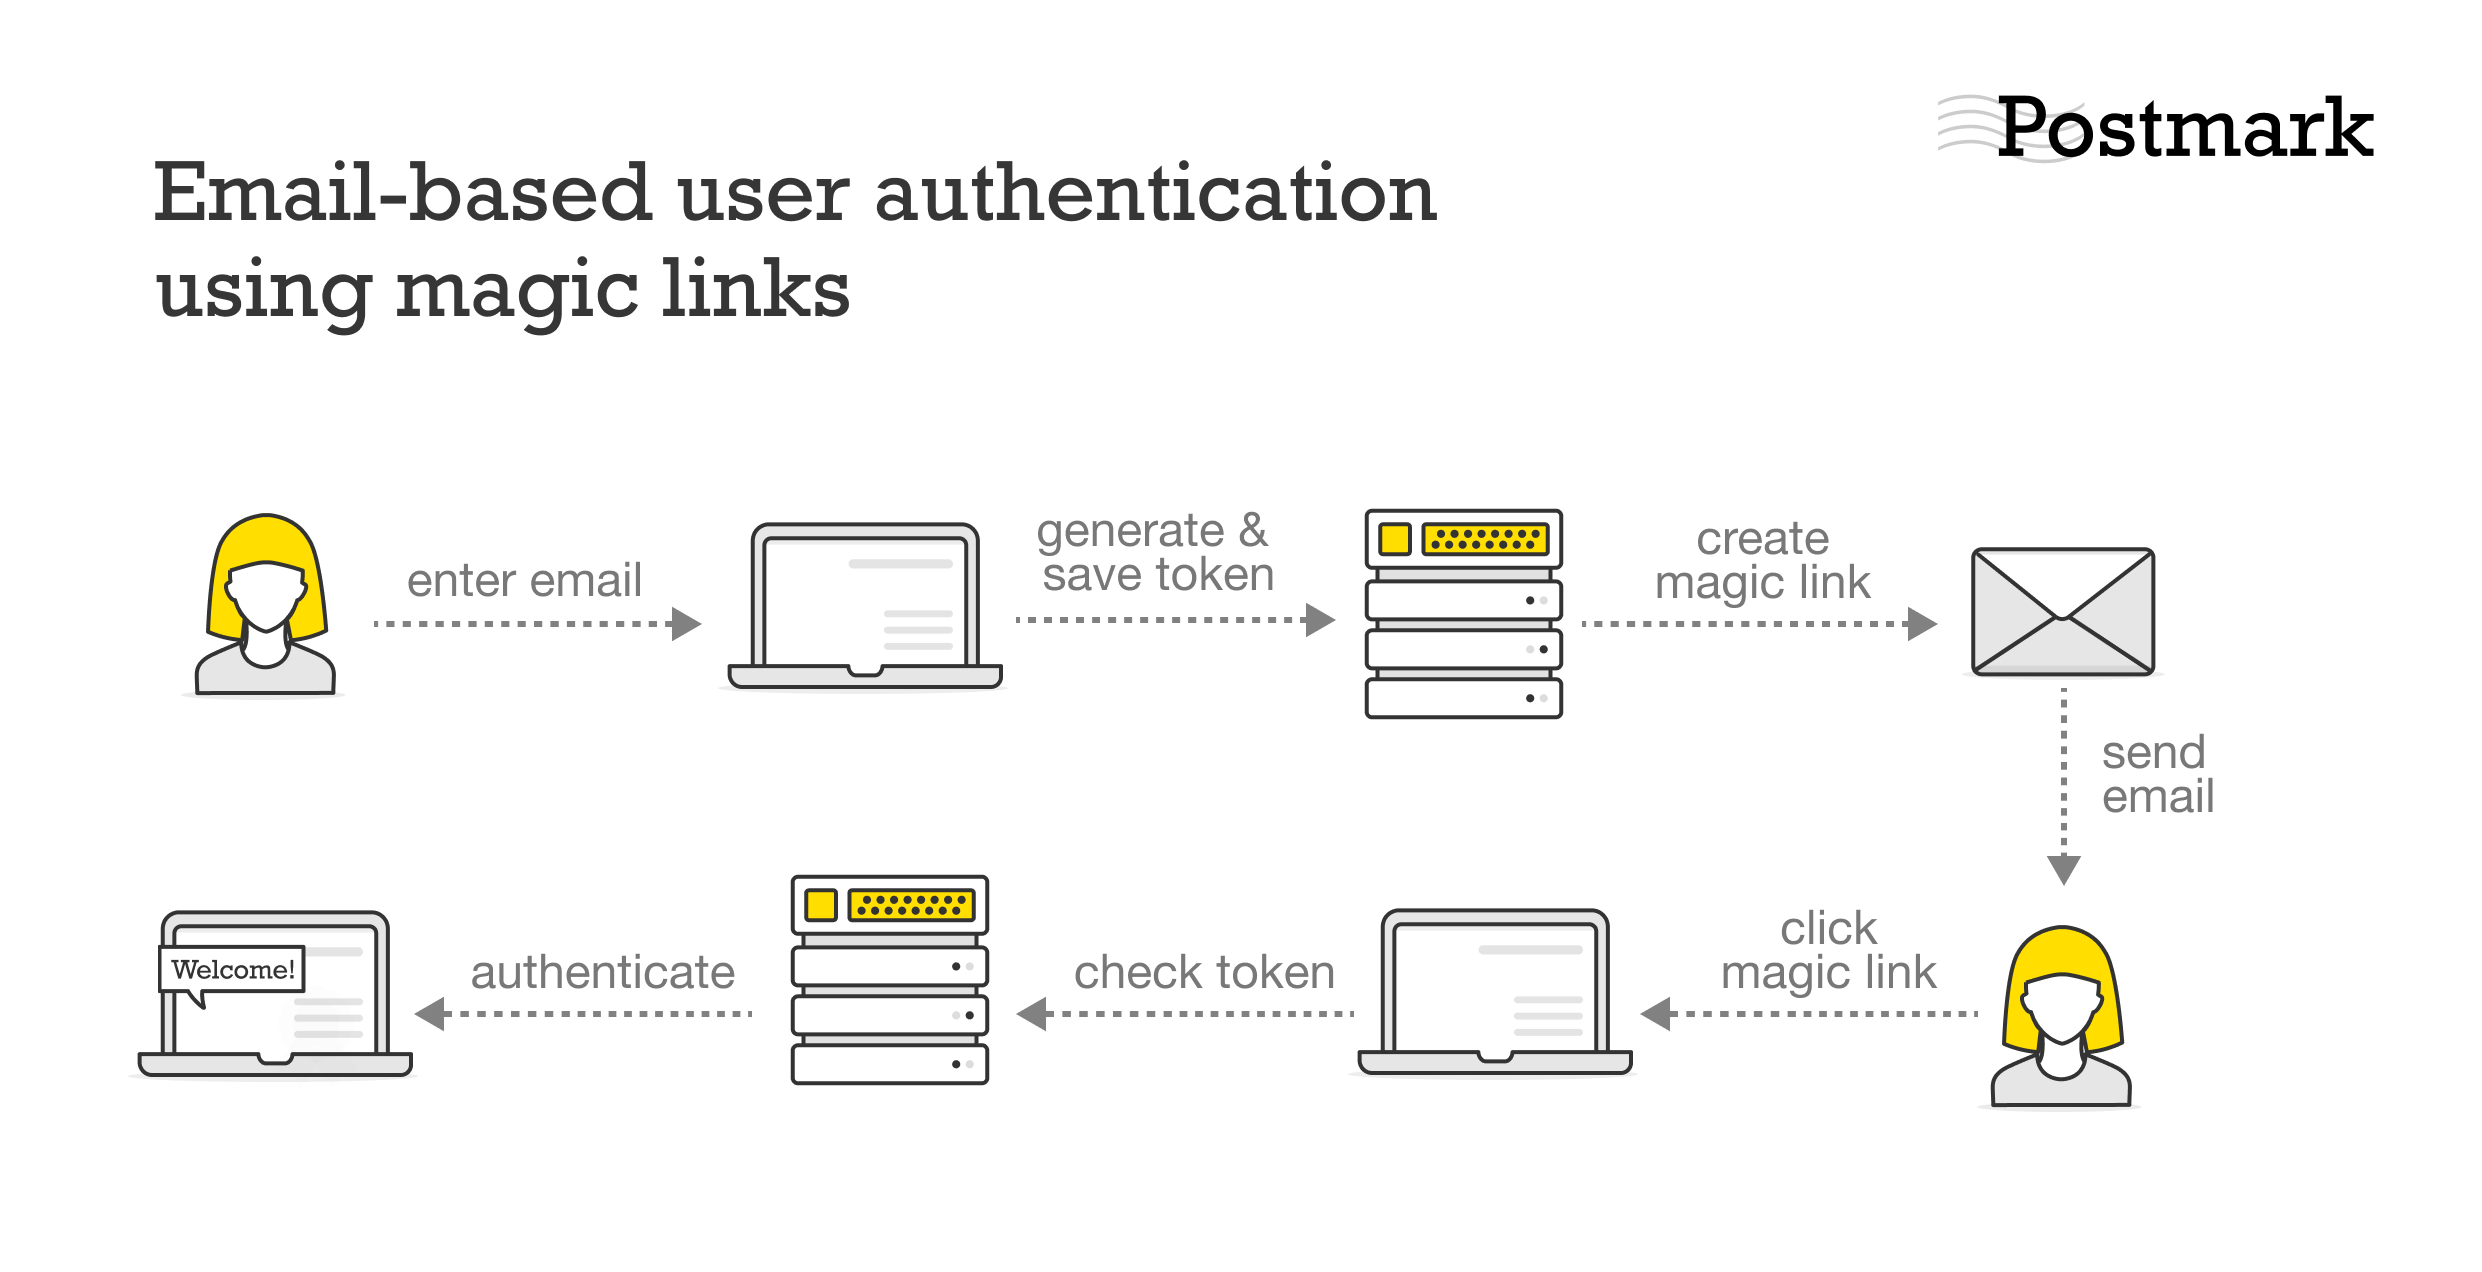 Email-based user authentication using magic links